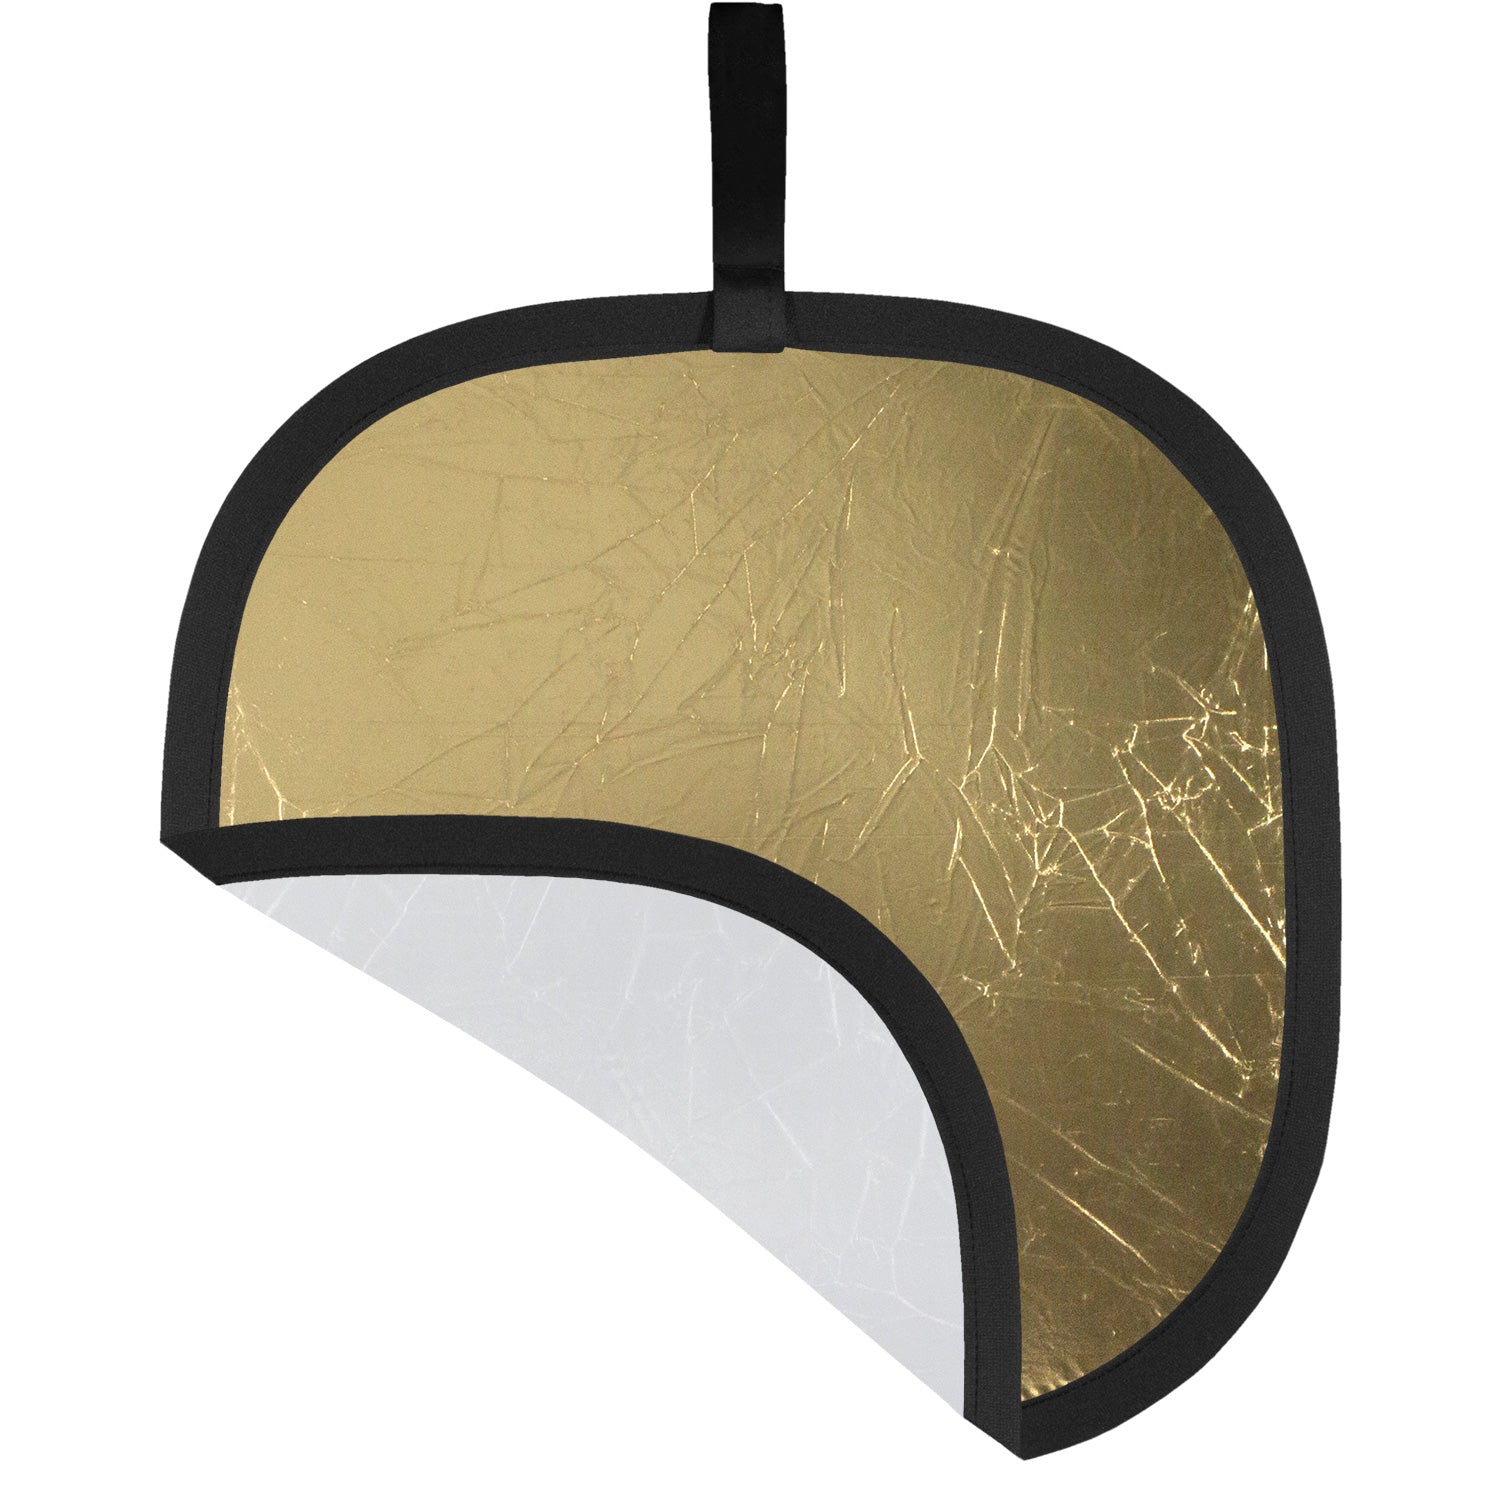 Illuminator Collapsible 2-in-1 Gold/White Bounce Reflector (22")